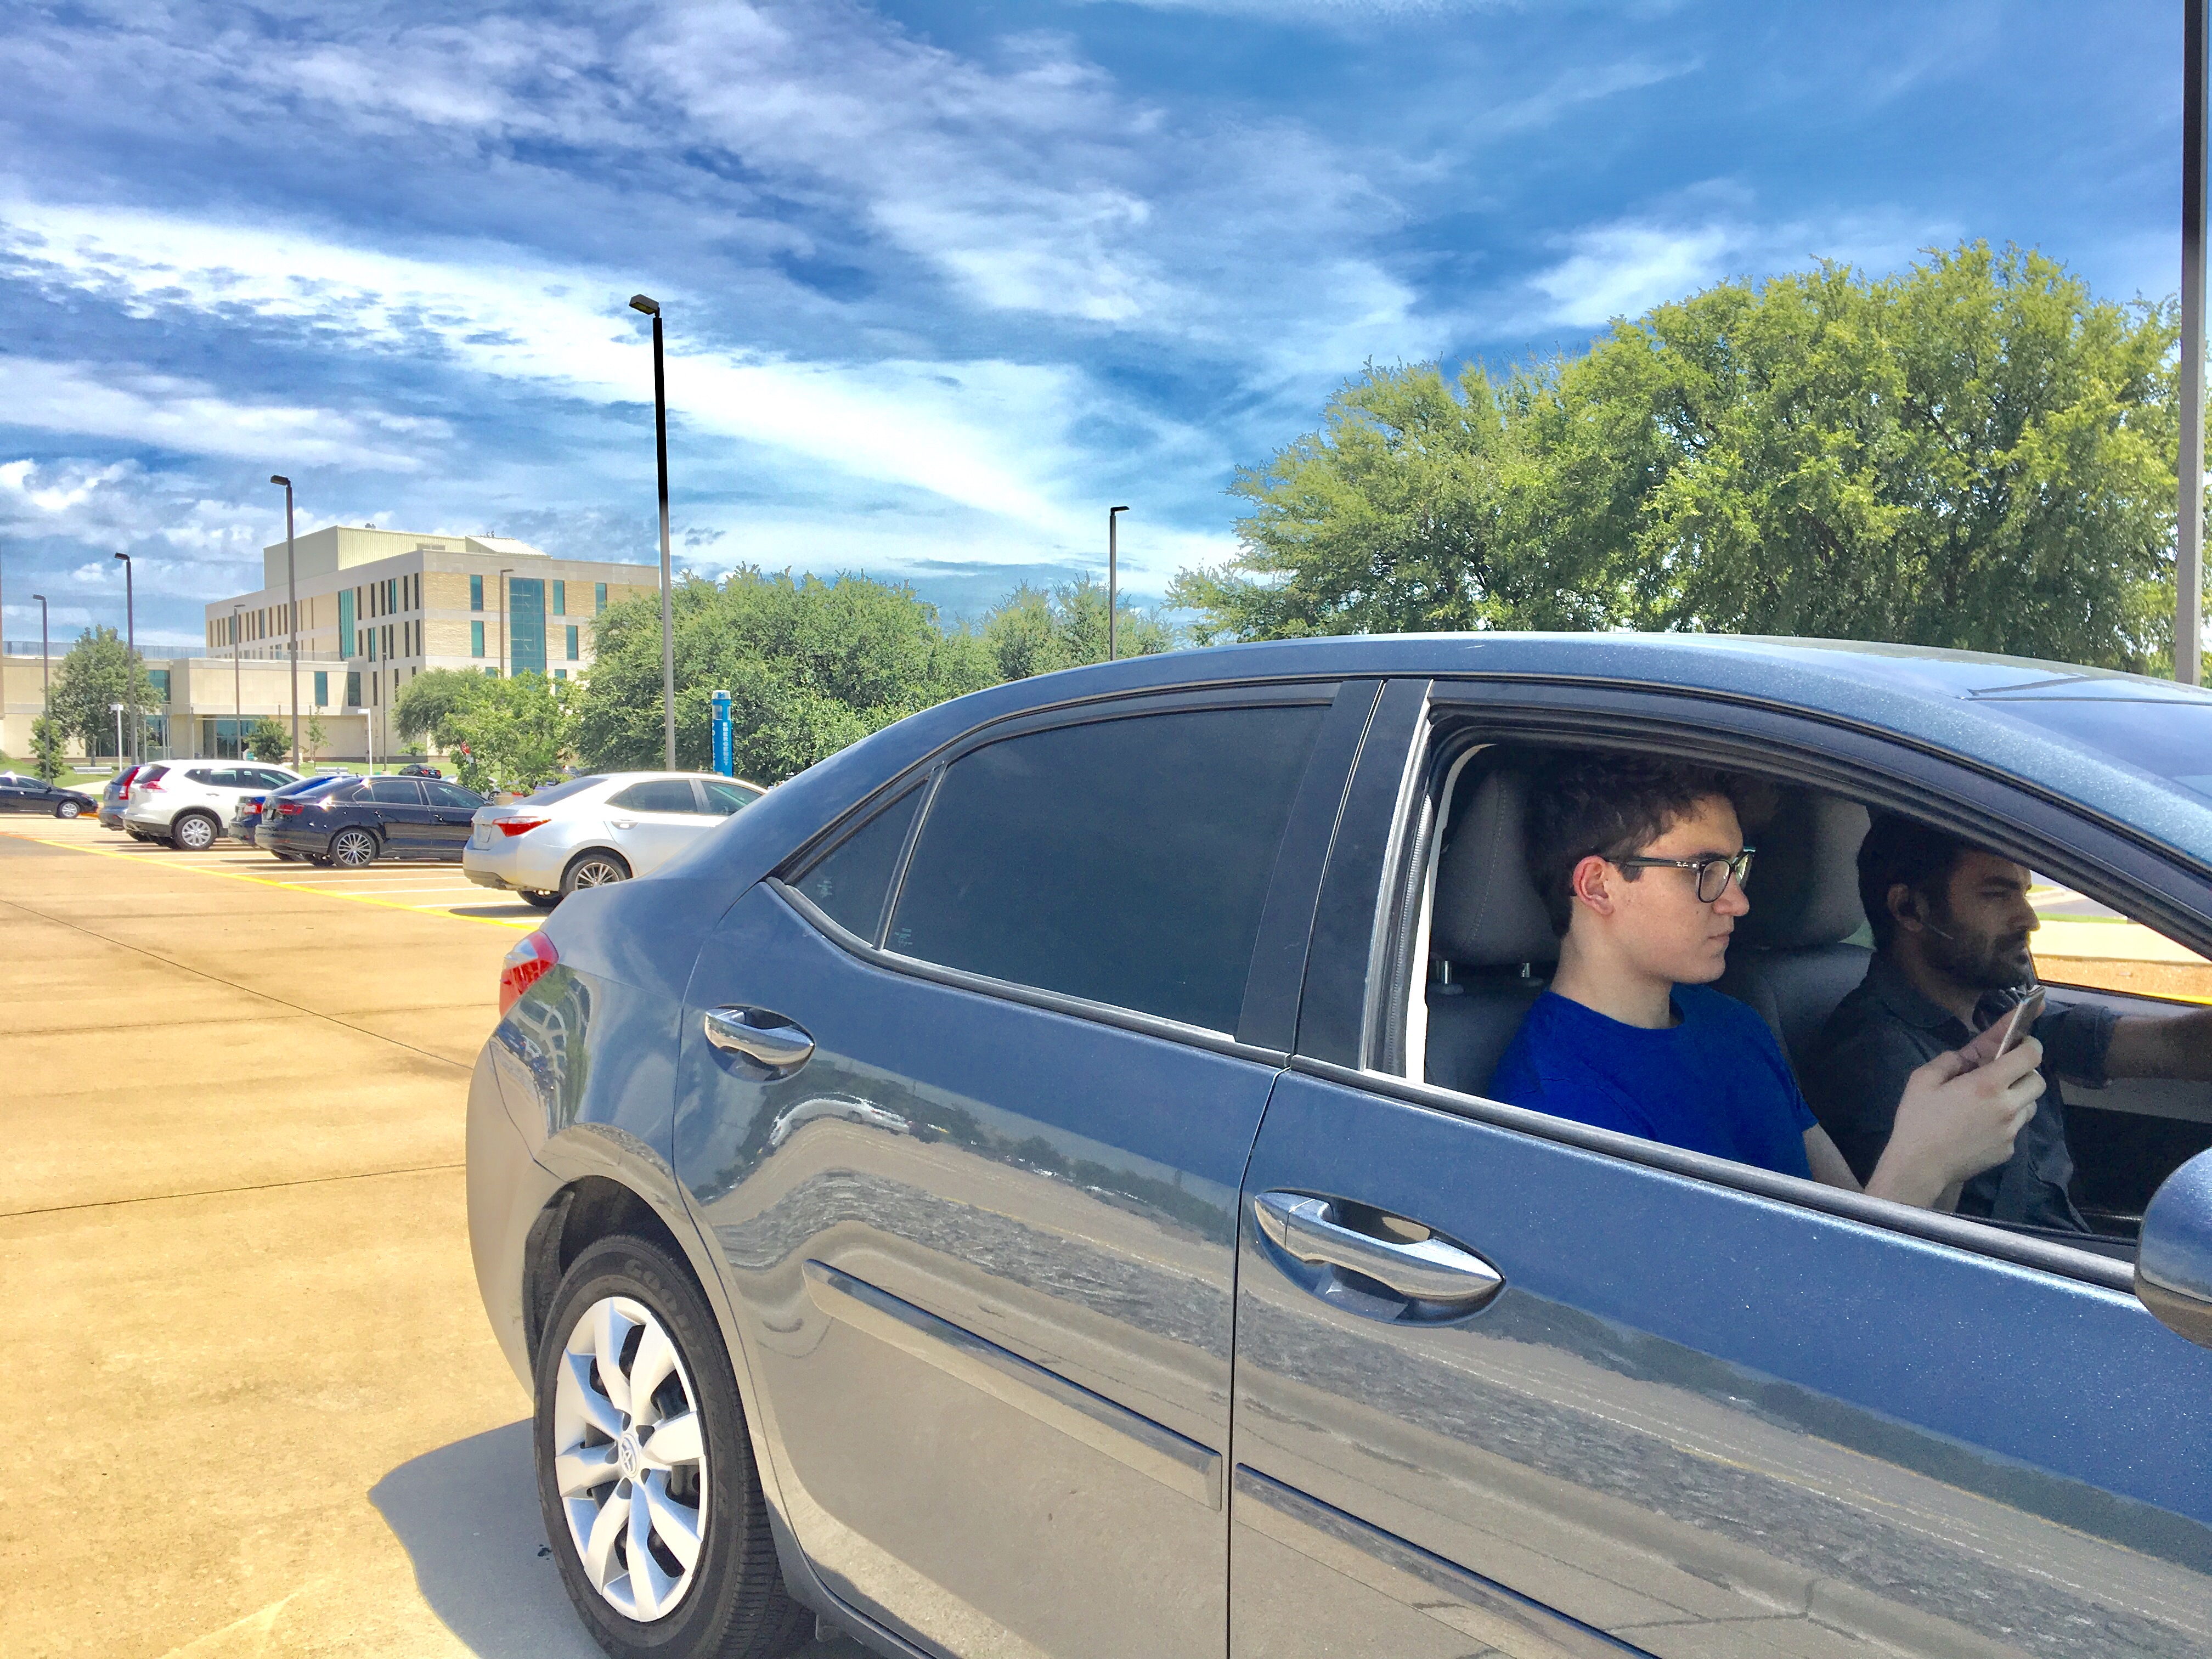 New rideshare app launches on campus